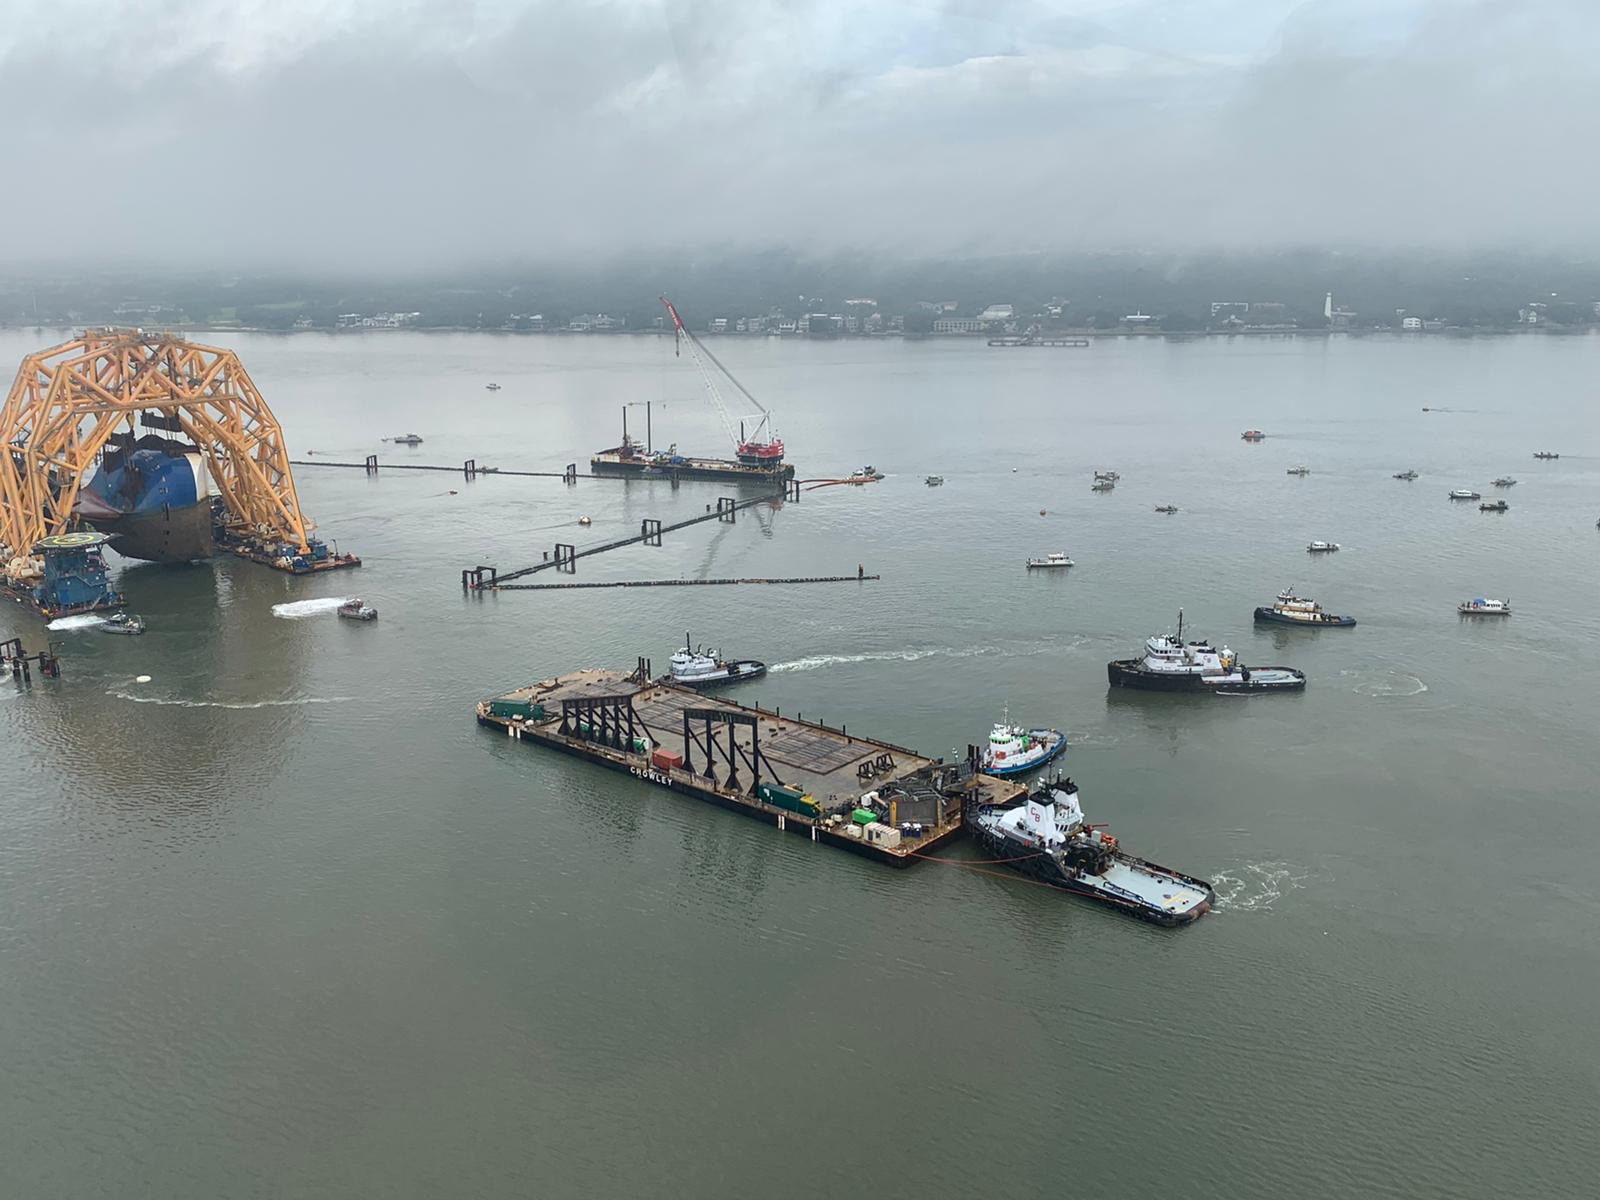 Photos: Section One of Golden Ray Wreck Cut and Lifted Onto Barge